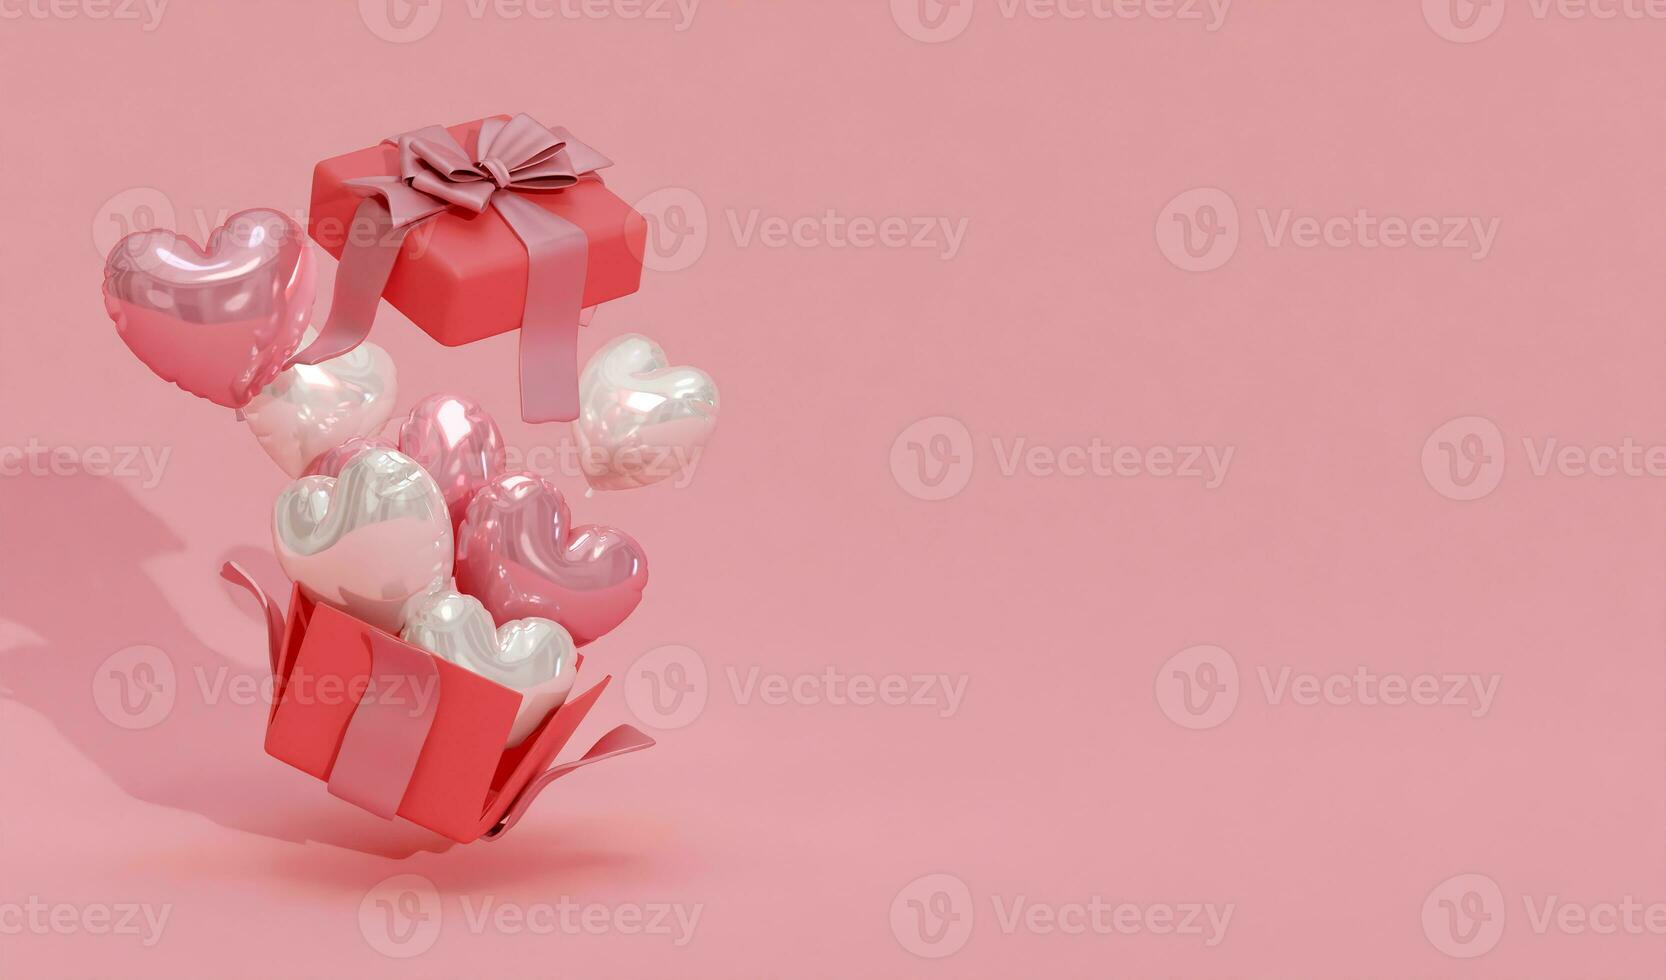 3D rendering pink background, open gift box and flying heart balloons, suitable for Valentine's Day, weddings, birthdays, etc. photo